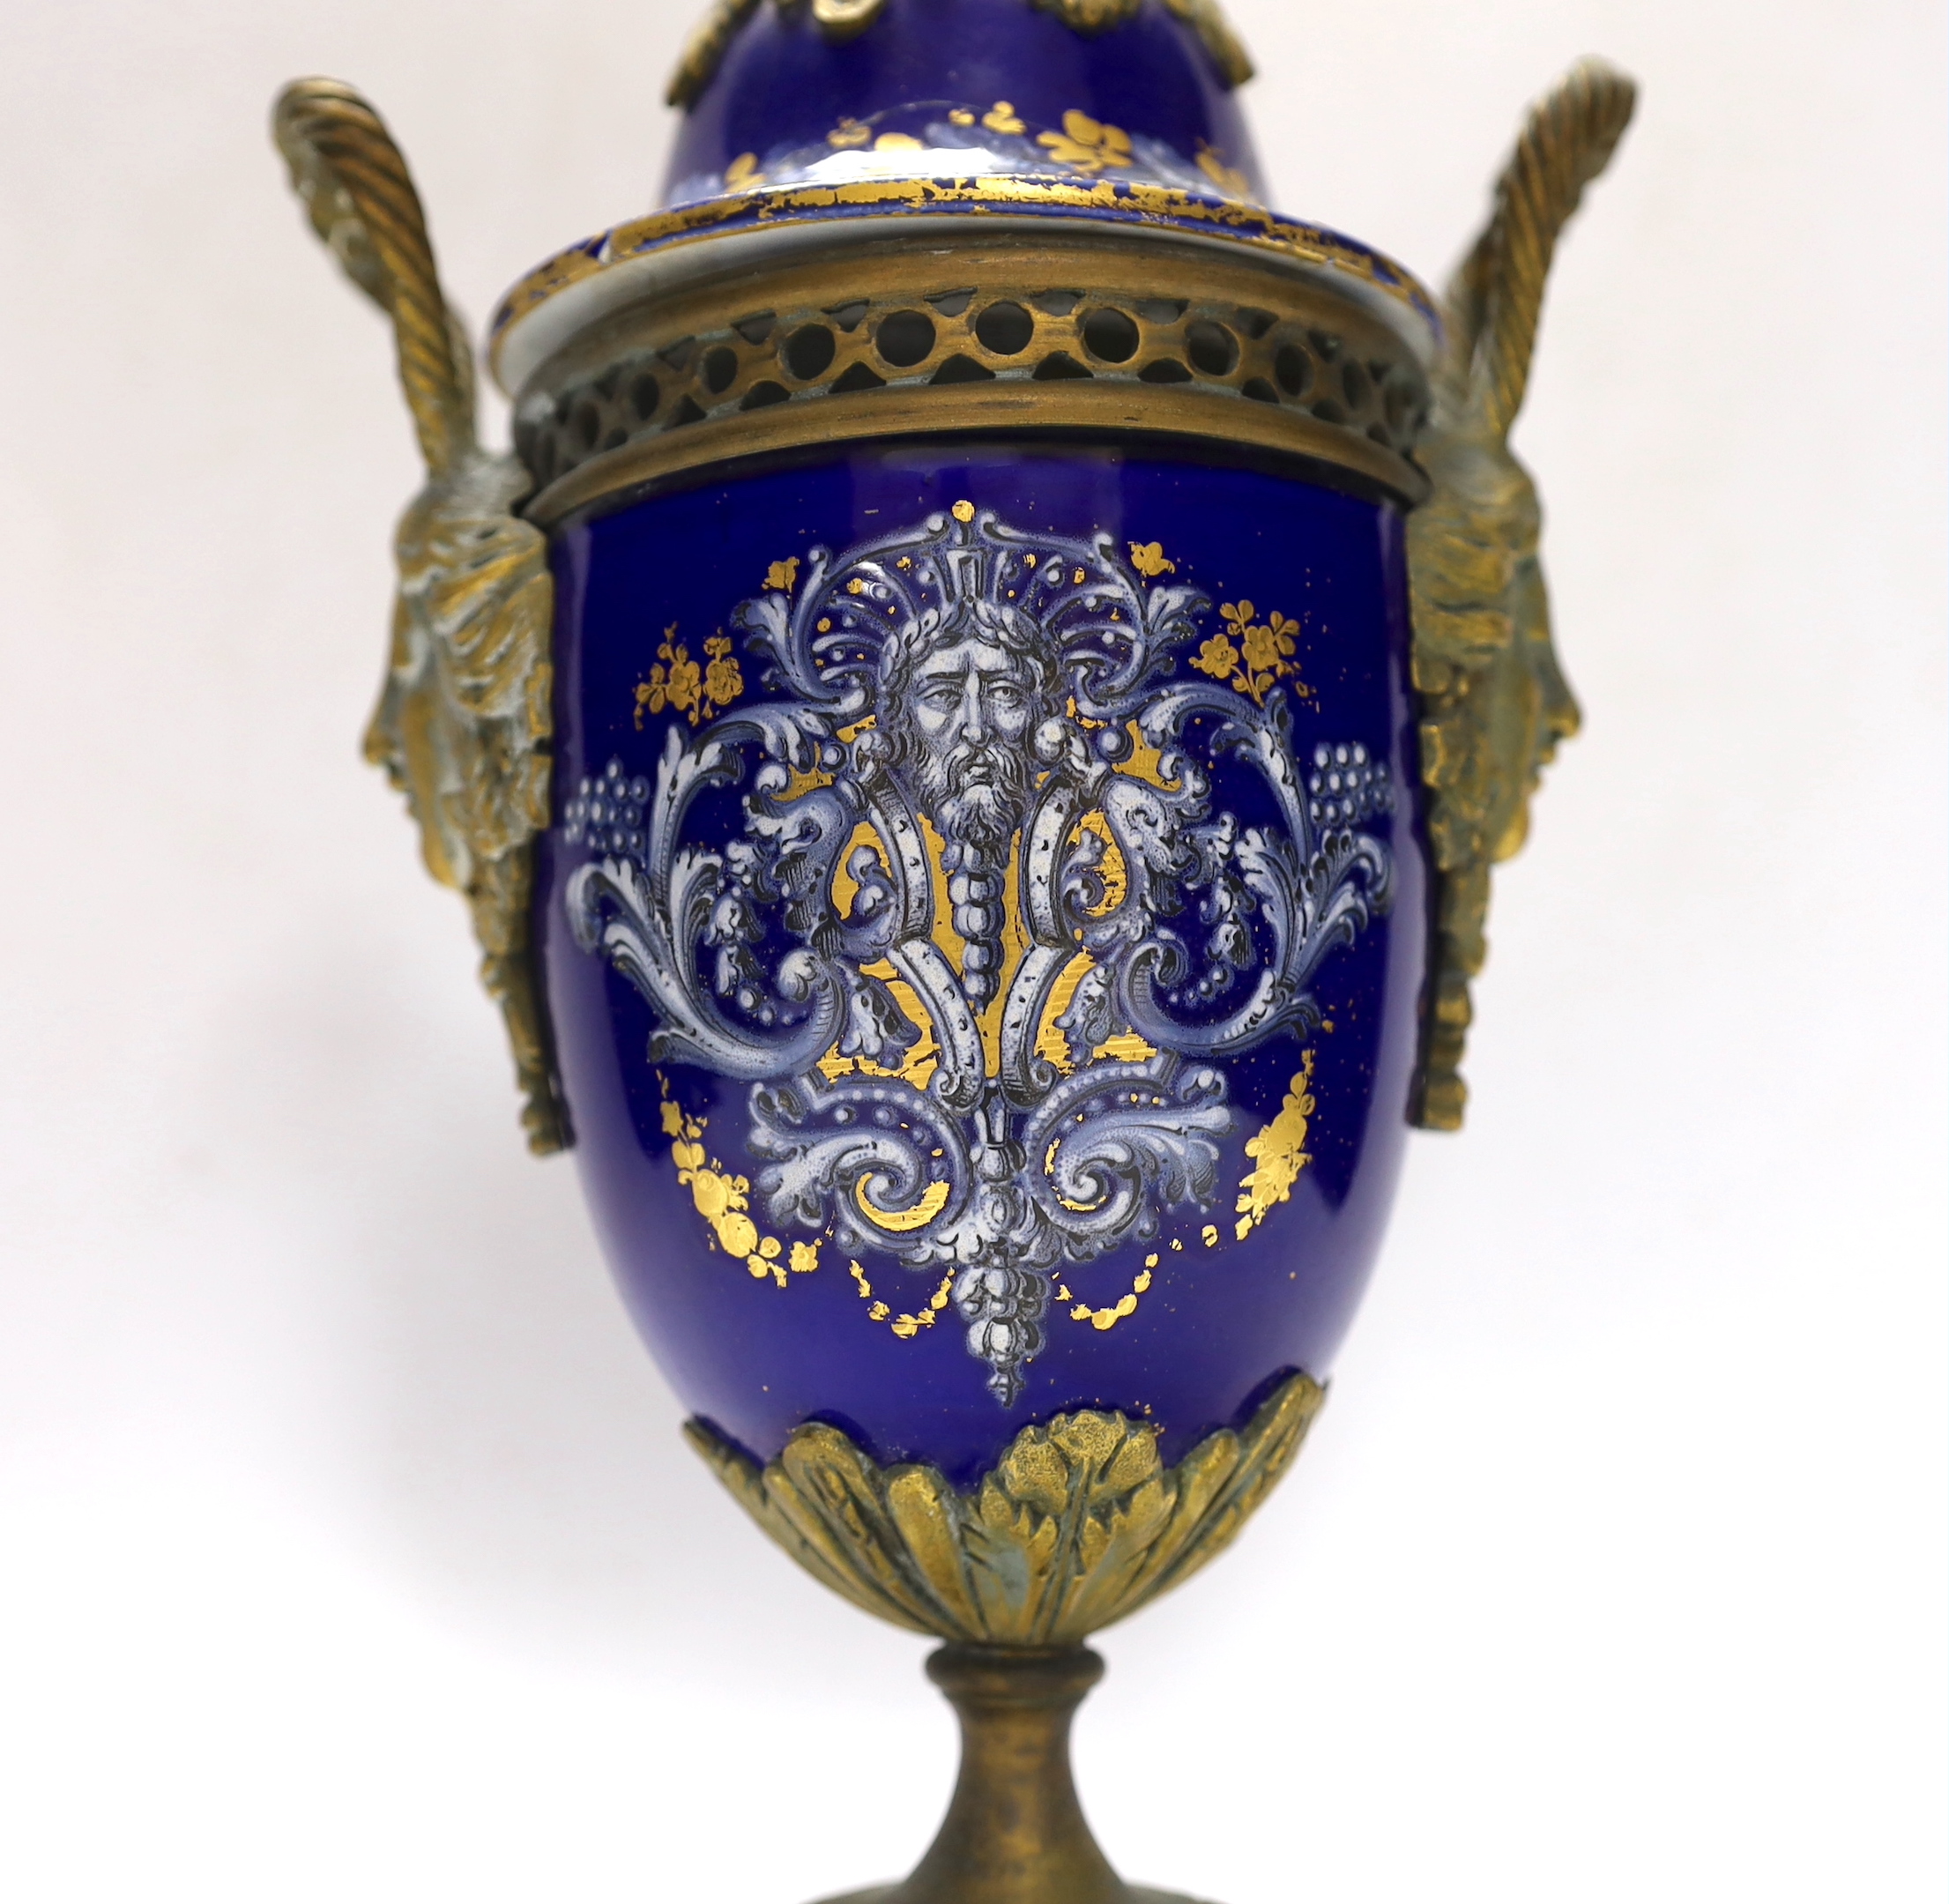 A Limoges style porcelain ormolu mounted urn and cover, 29cm high